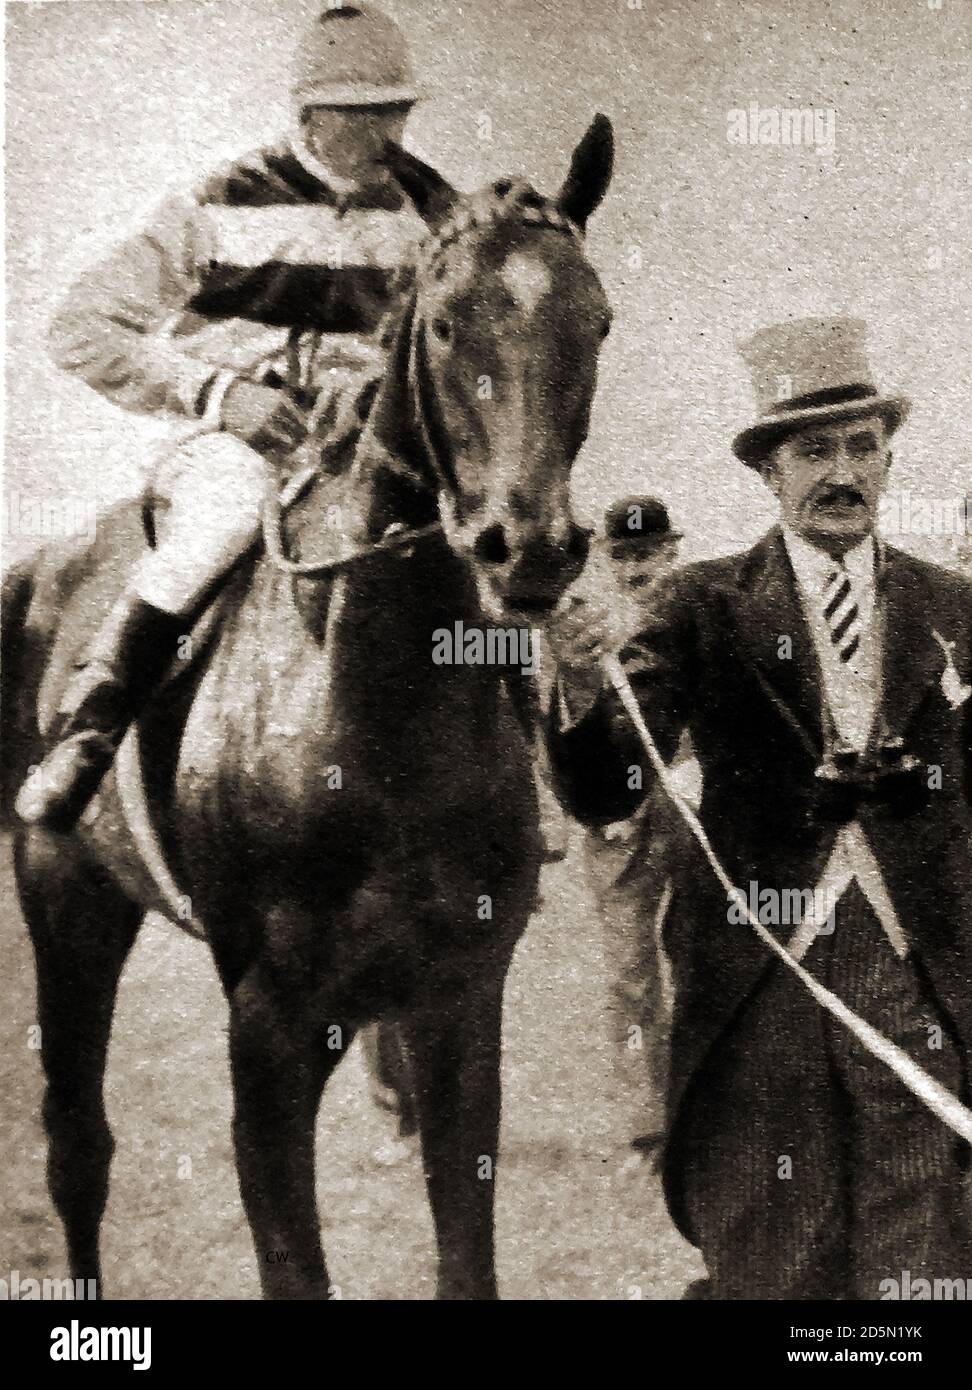 1932  Tom Walls, the then popular actor, horse owner and trainer, leading his horse April the Fifth after winning the English Derby. Thomas Kirby Walls (1883 – 1949) was an English stage and film actor, producer and director, best known for presenting and co-starring in the Aldwych farces in the 1920s and for starring in and directing their film adaptations.He set up stables at his home in Surrey and succesfully trained around  150 winners, including April the Fifth, his 1932 Derby winner.  April the 5th was a British Thoroughbred racehorse and sire. Jockey is Fred (Frederick) Lane. Stock Photo